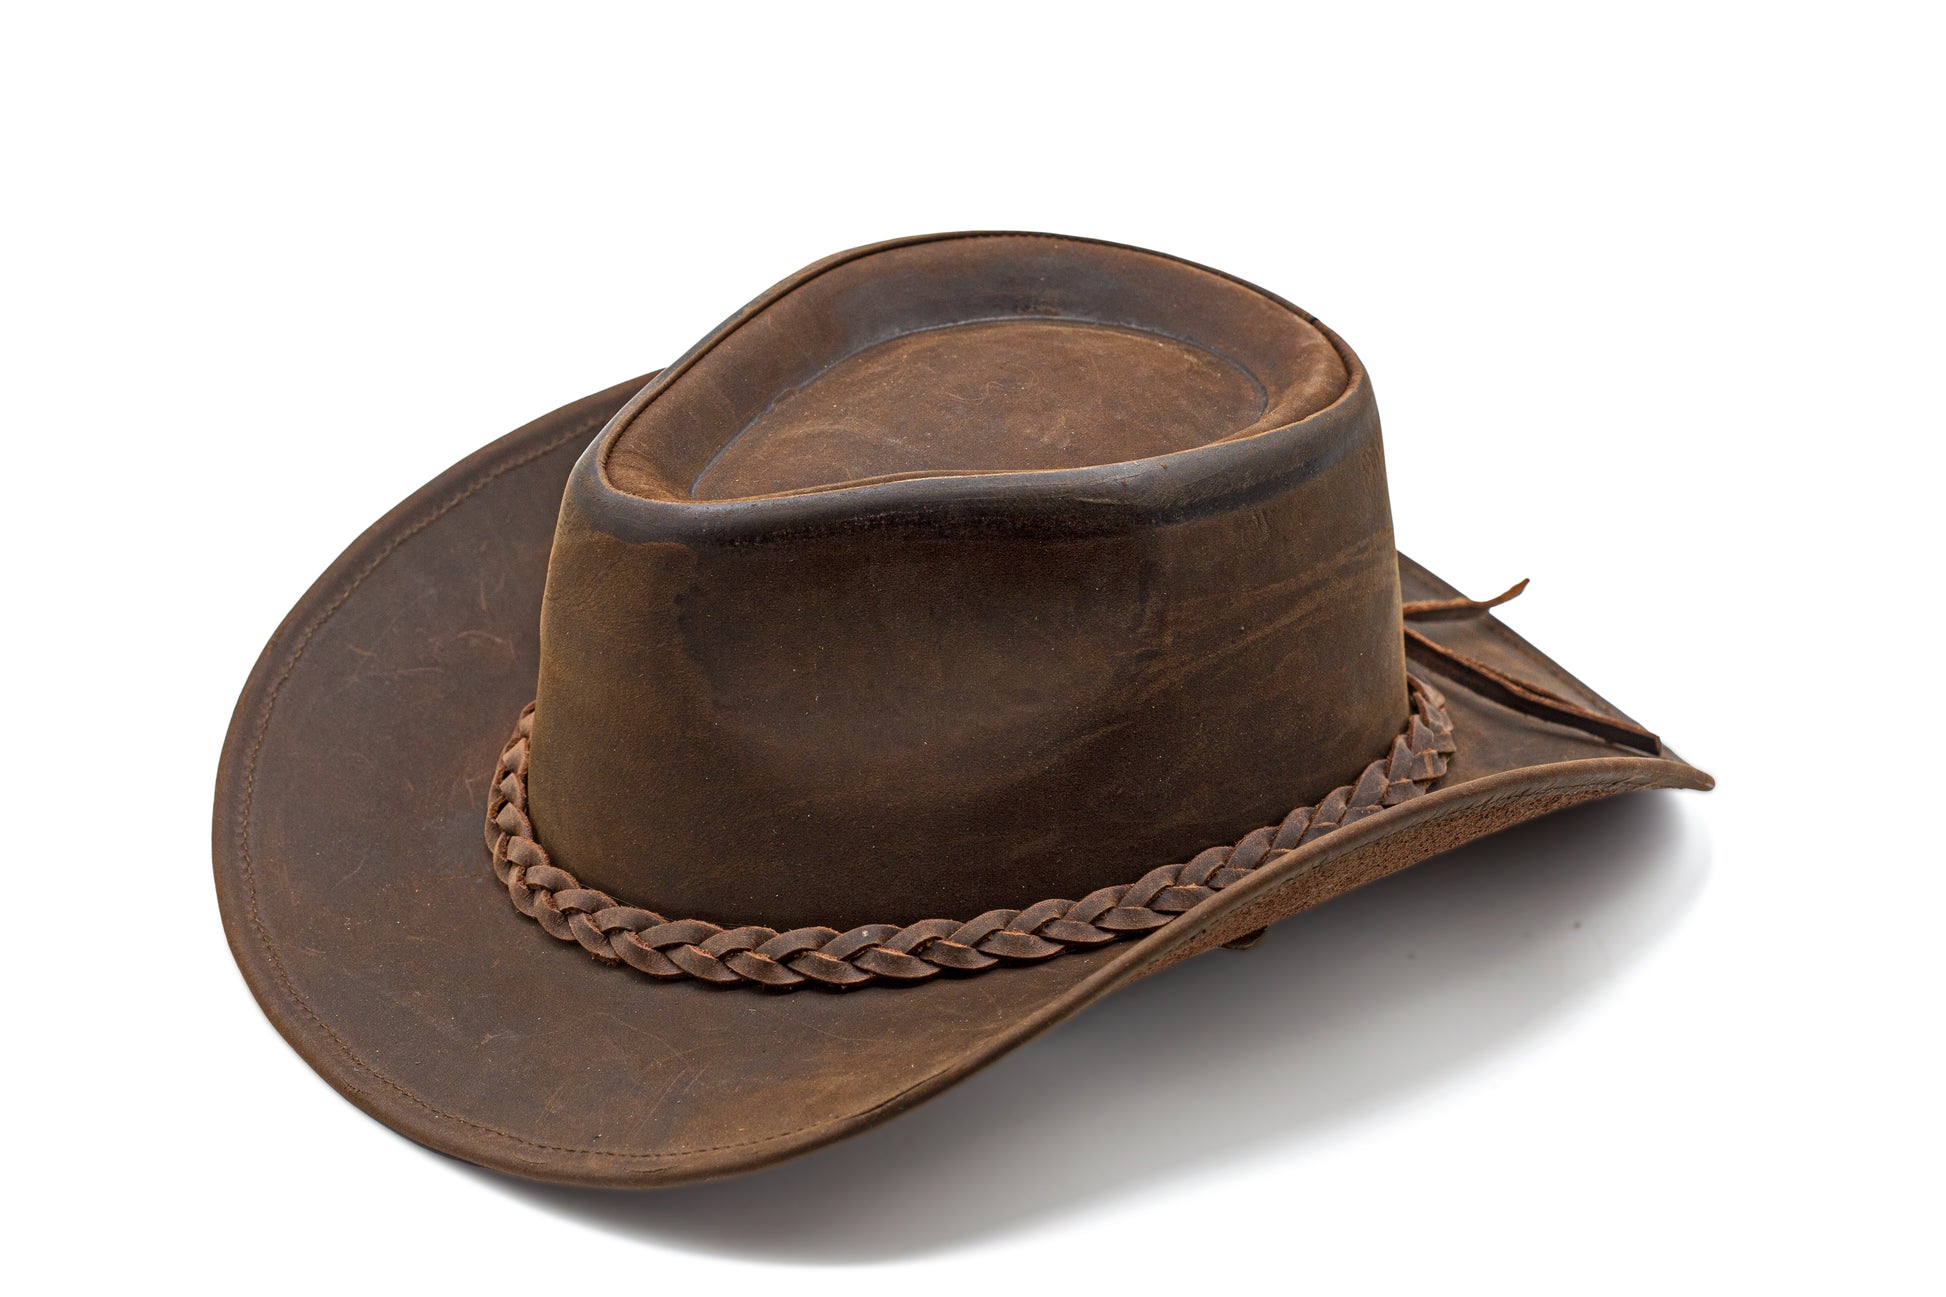 leather cowboy hat Australian style shapeable as outback best gift for teenage boys girls Christmas grandma grandpa